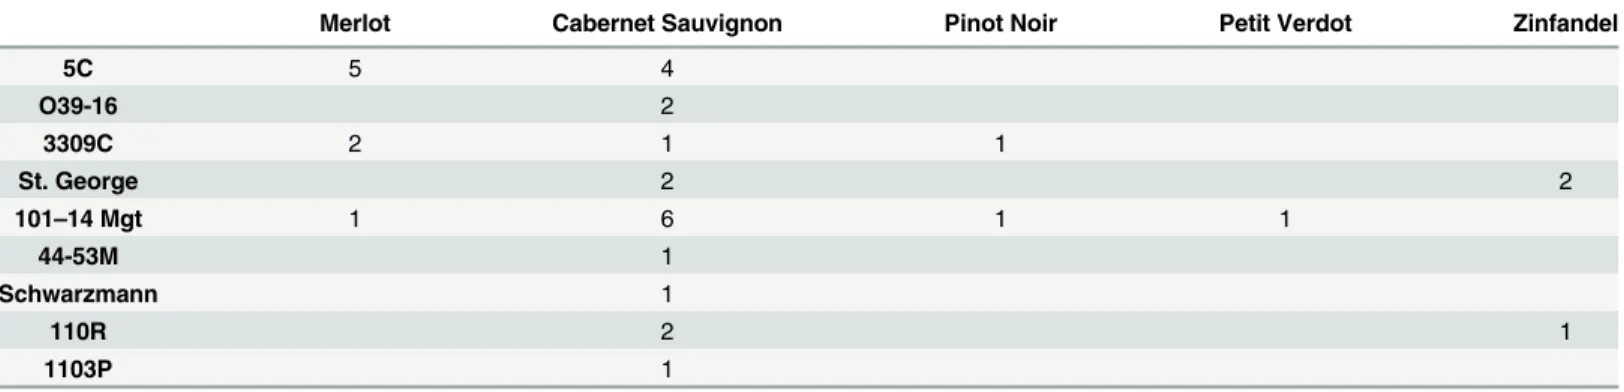 Table 2. Number of Study Sites with Specific Cultivar-Rootstock Combinations.